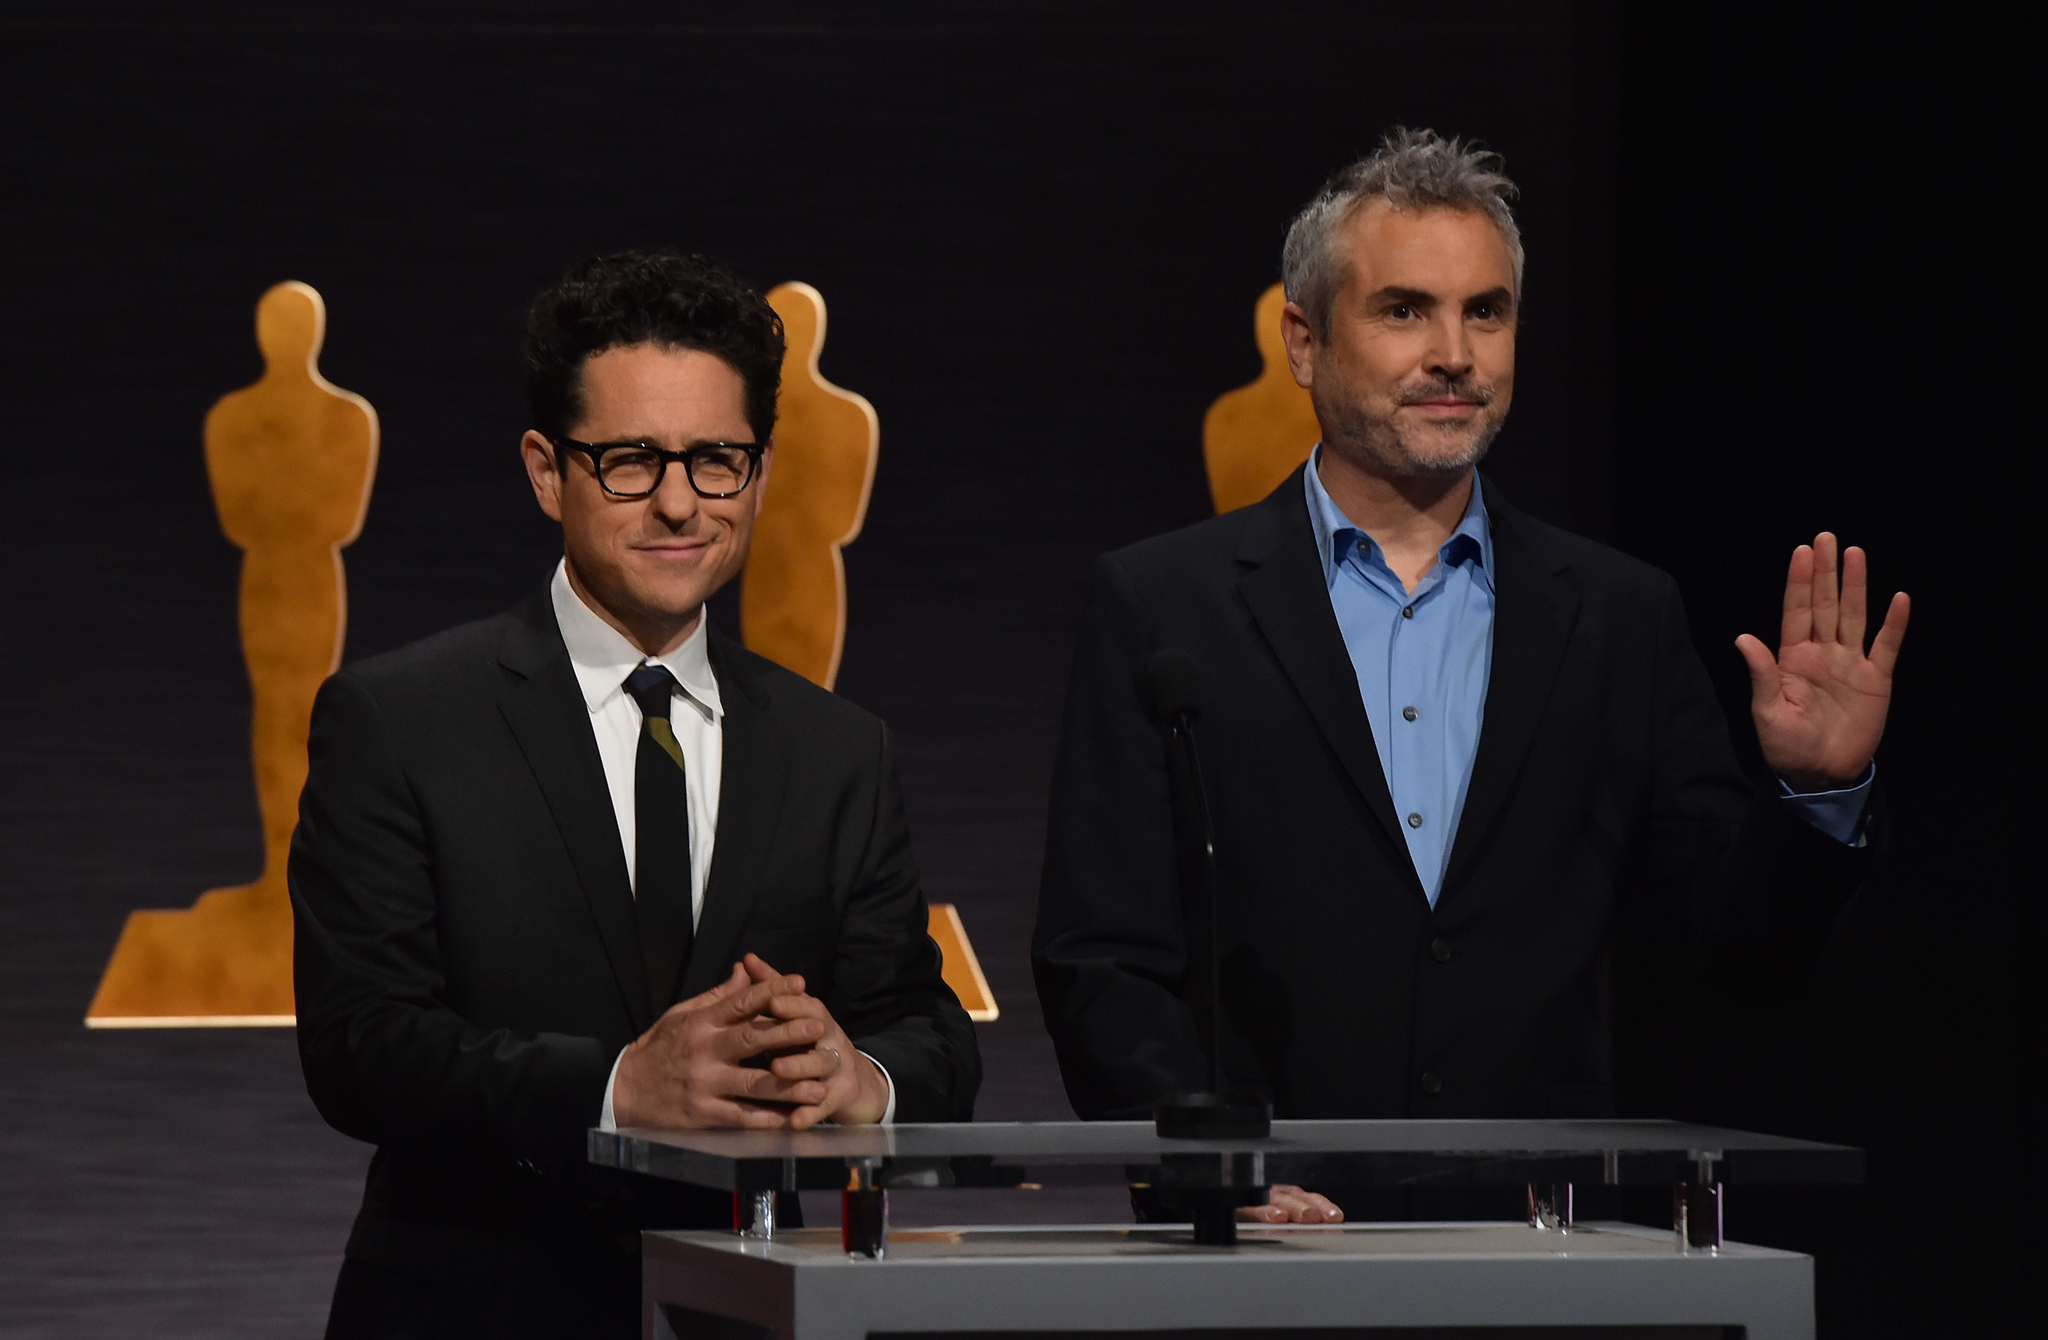 J.J. Abrams and Alfonso Cuarón at event of The Oscars (2015)